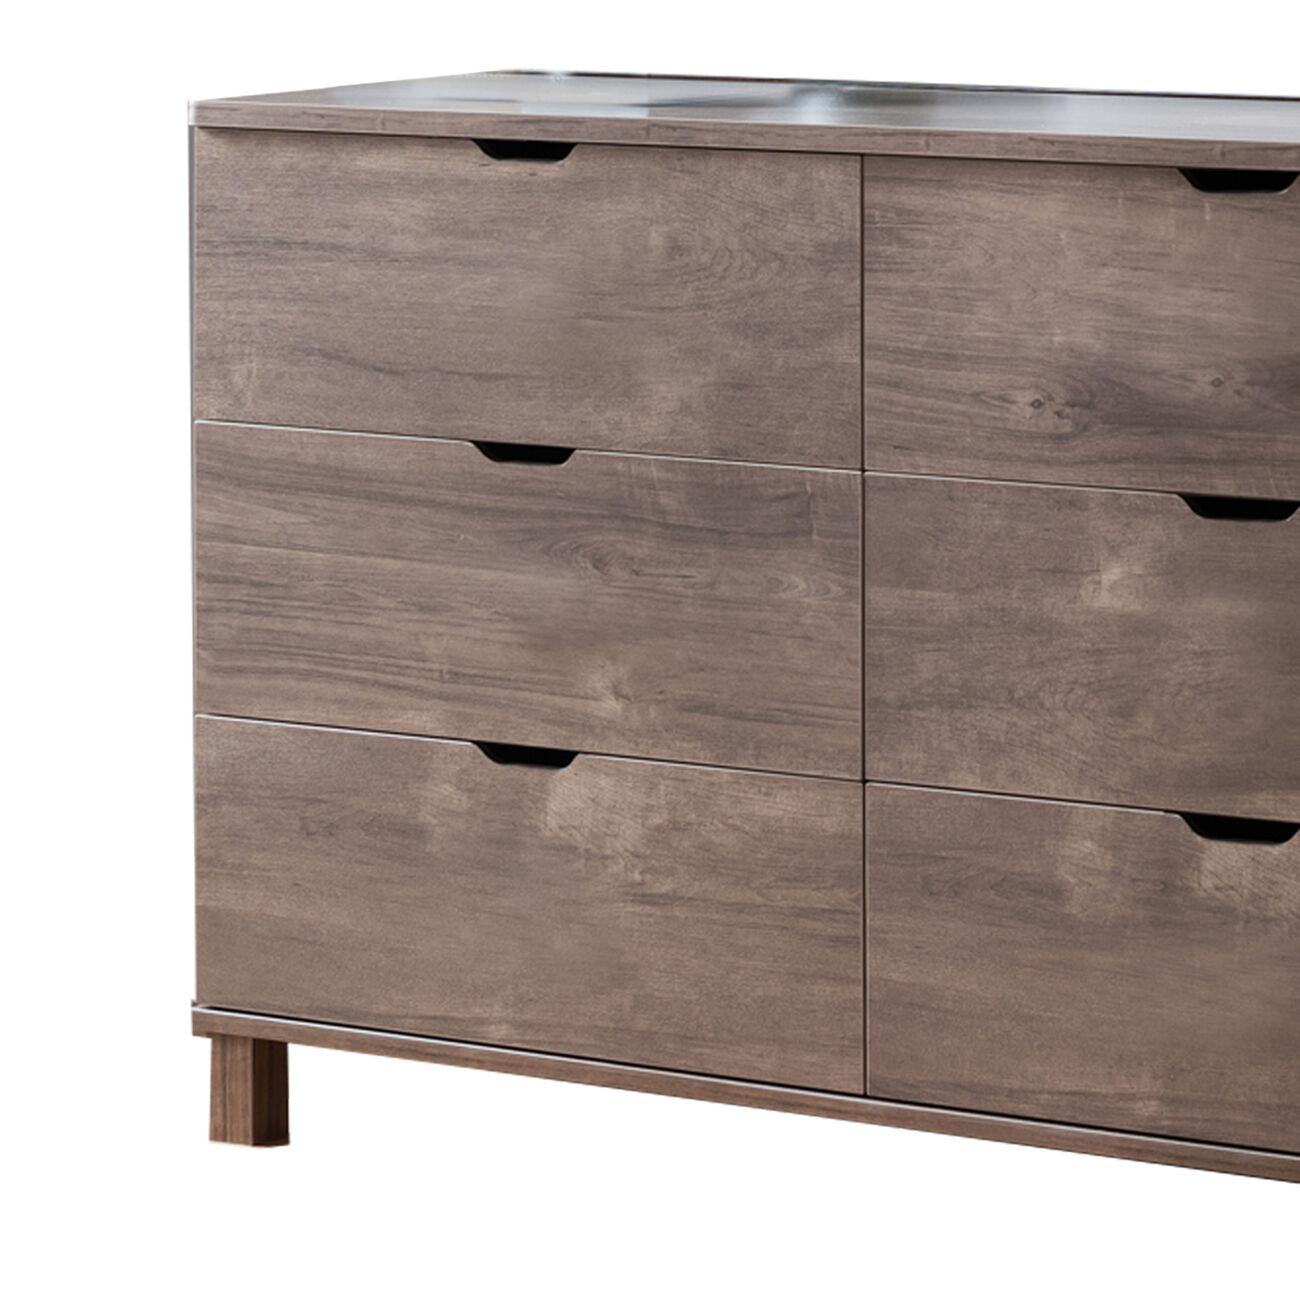 Wooden Frame Dresser with 6 Drawers and Cut Out Pulls, Hazelnut Brown